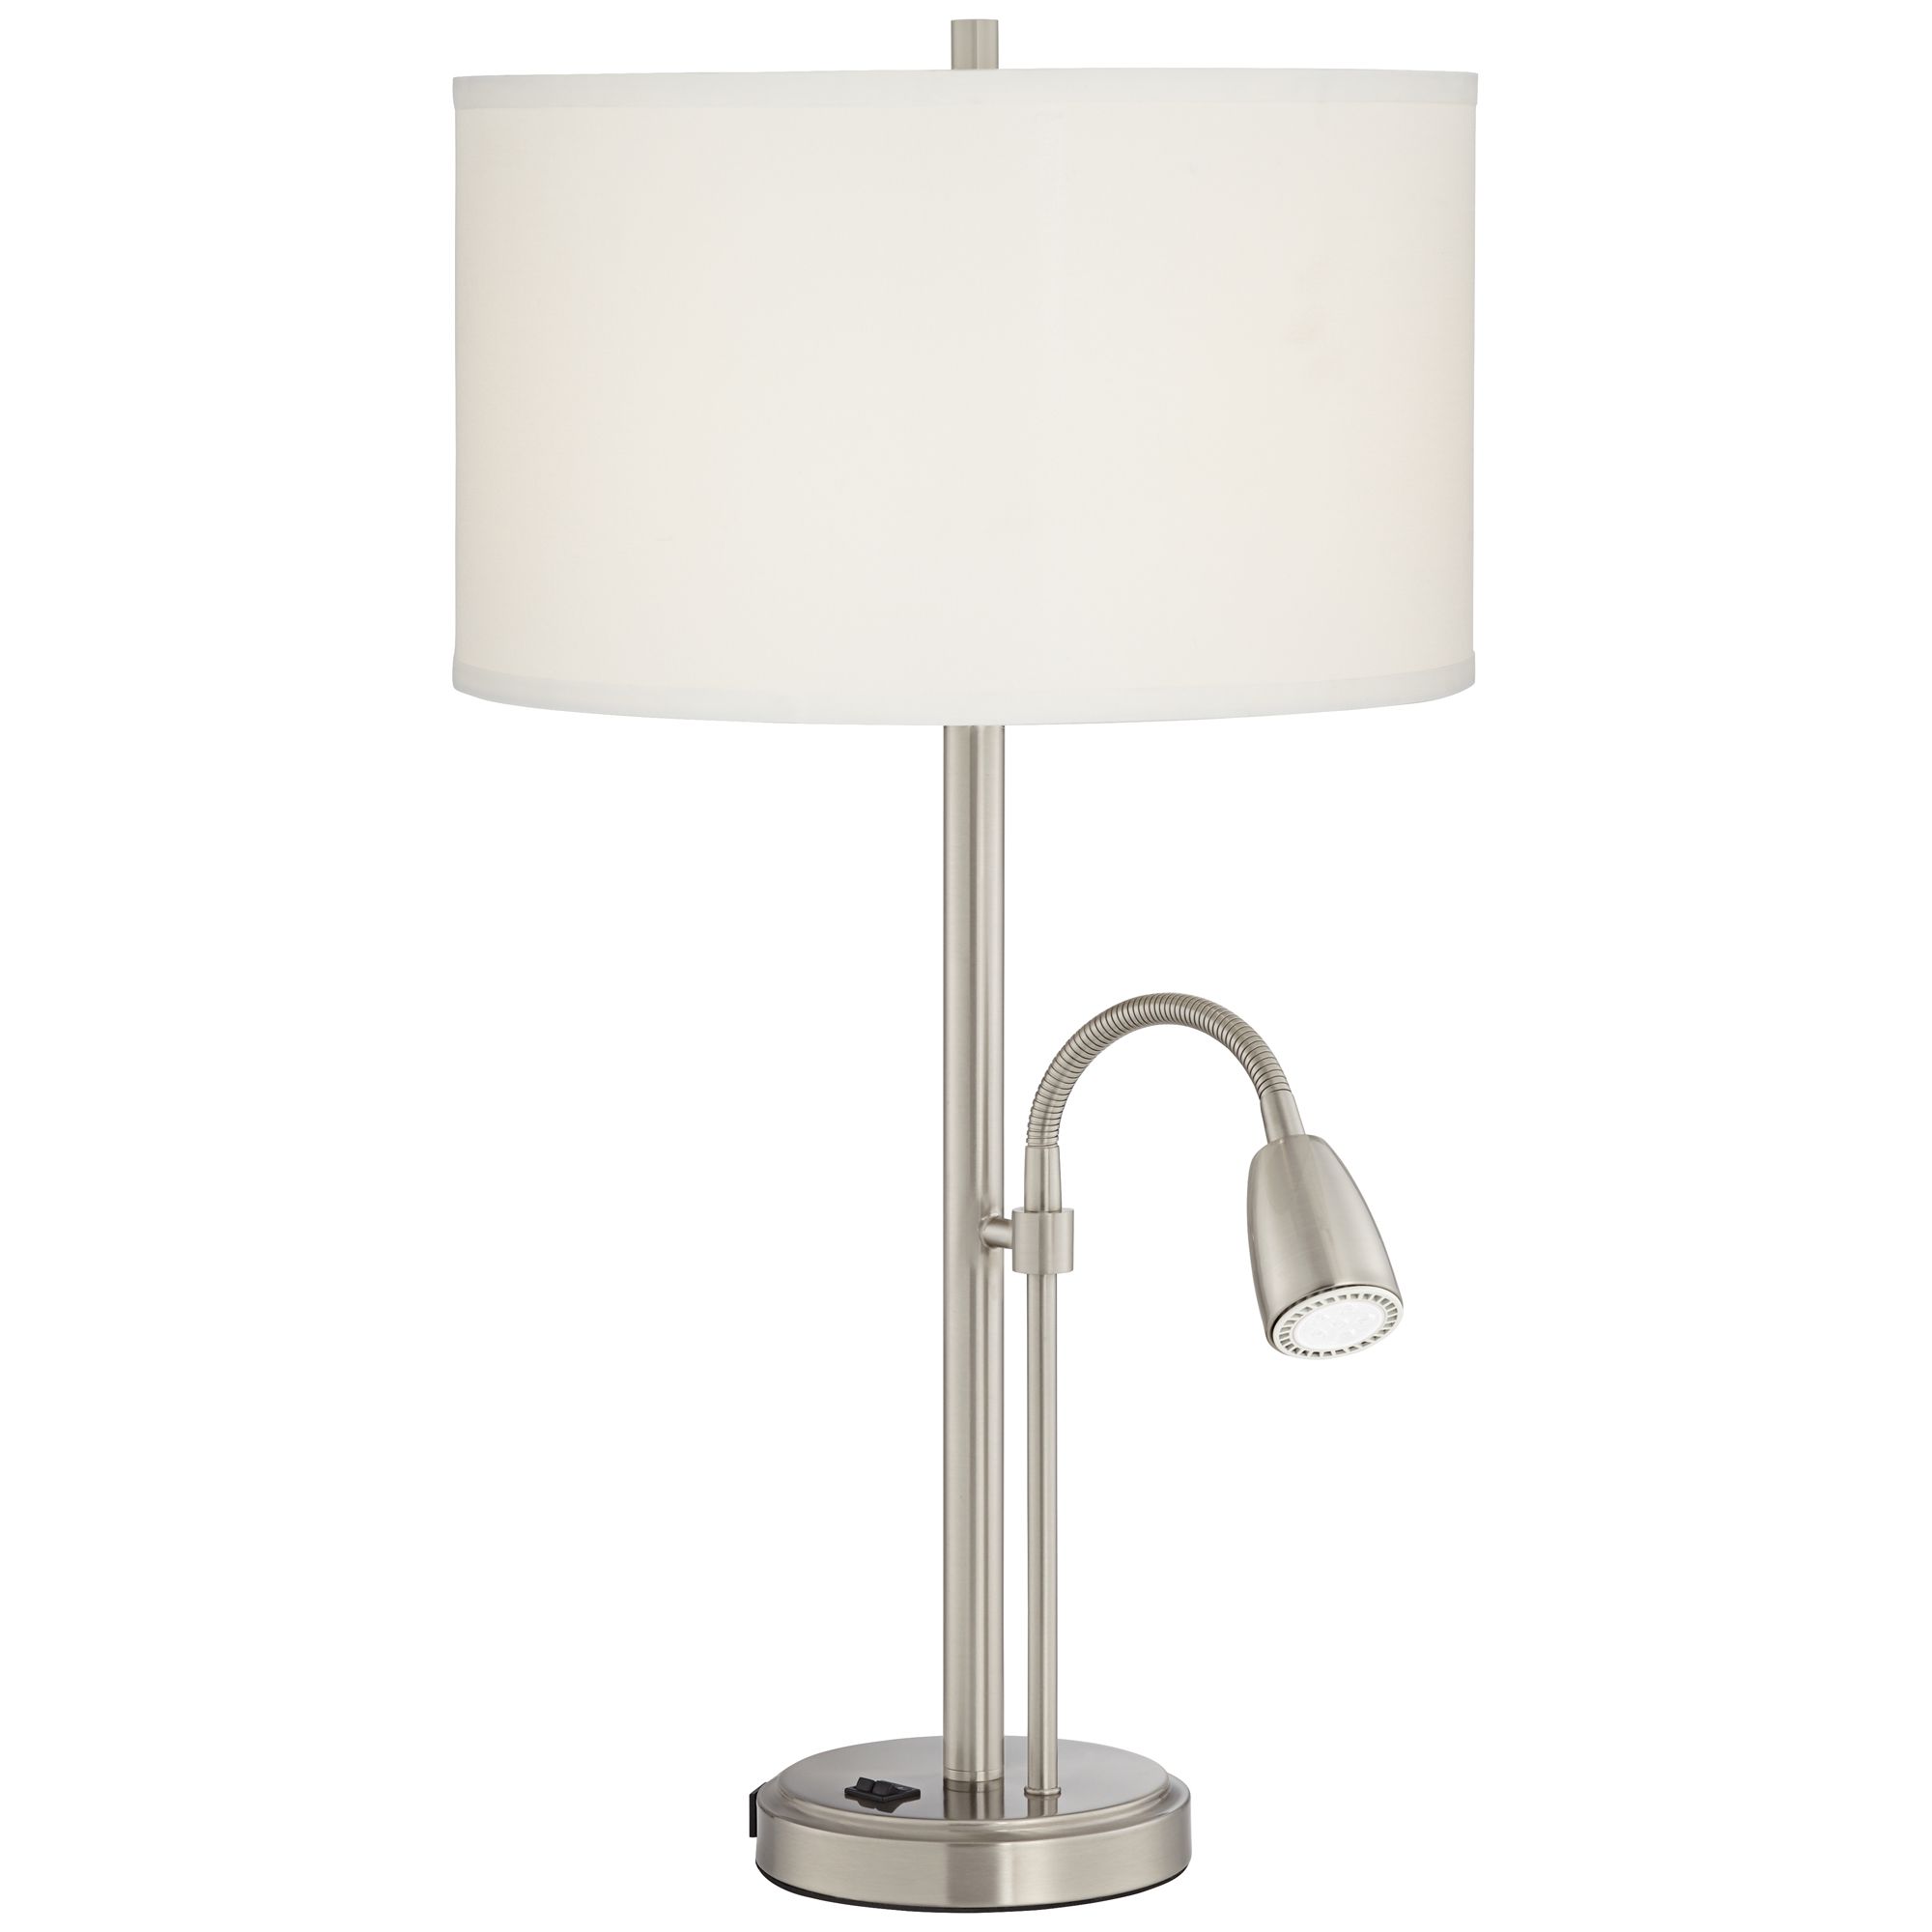 Possini Euro Design Traverse Modern Table Lamps Set of 29 1/2" Tall Brushed  Nickel with USB Charging Port LED Gooseneck White Drum Shade for Desk 